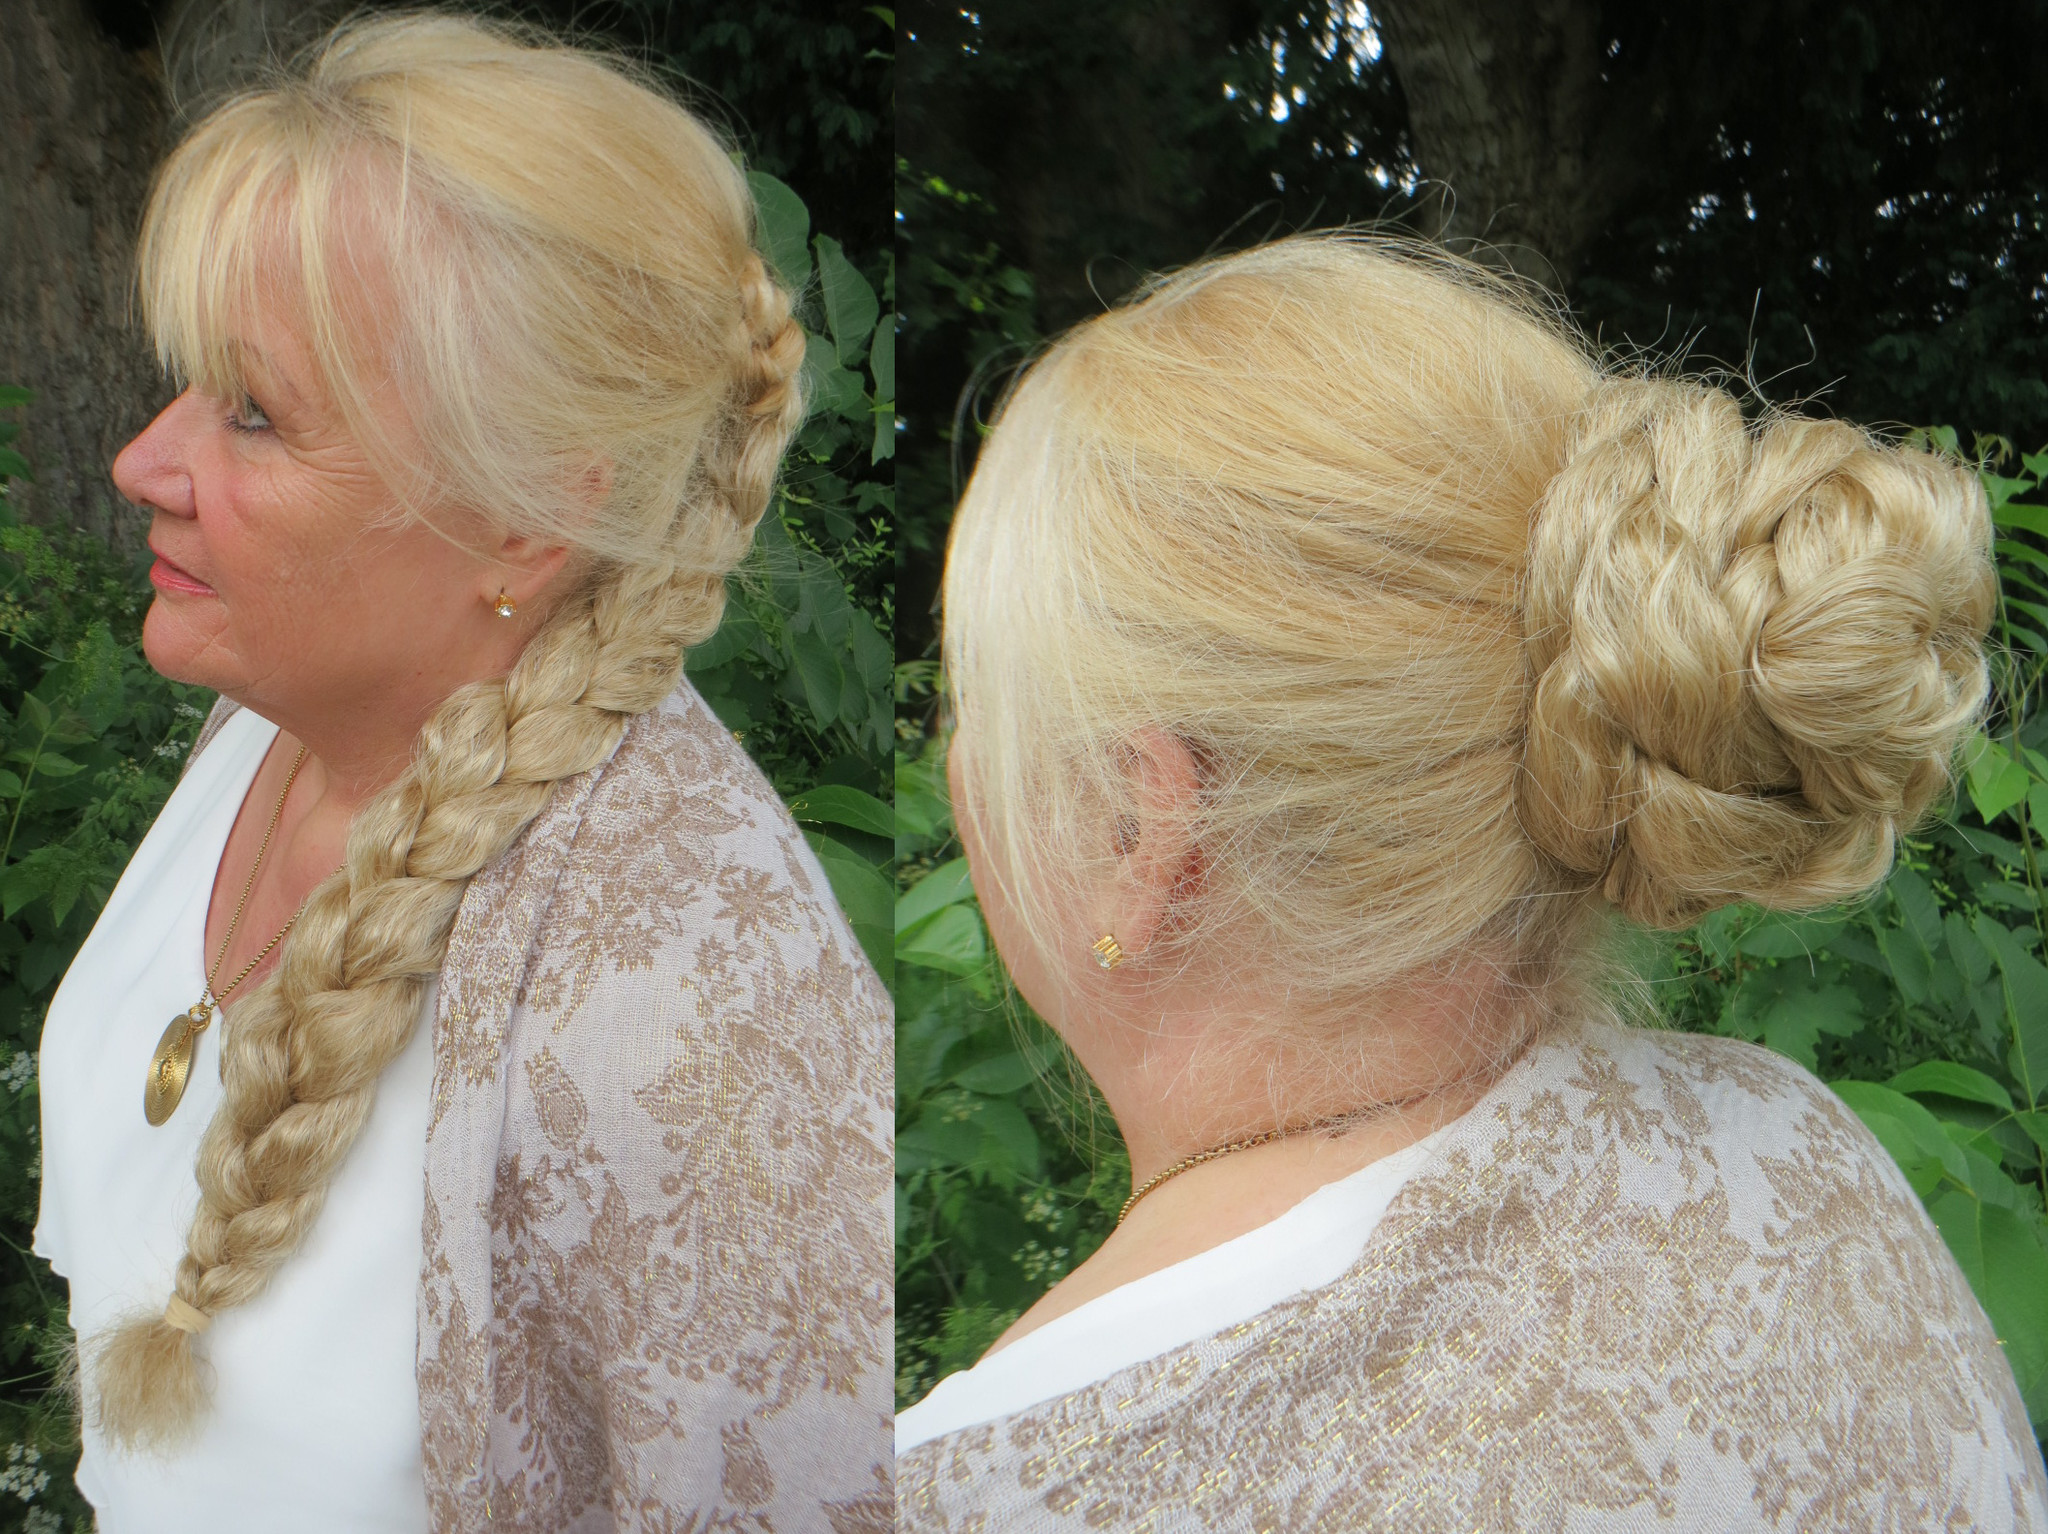 Bridal Hairstyles & Accessories